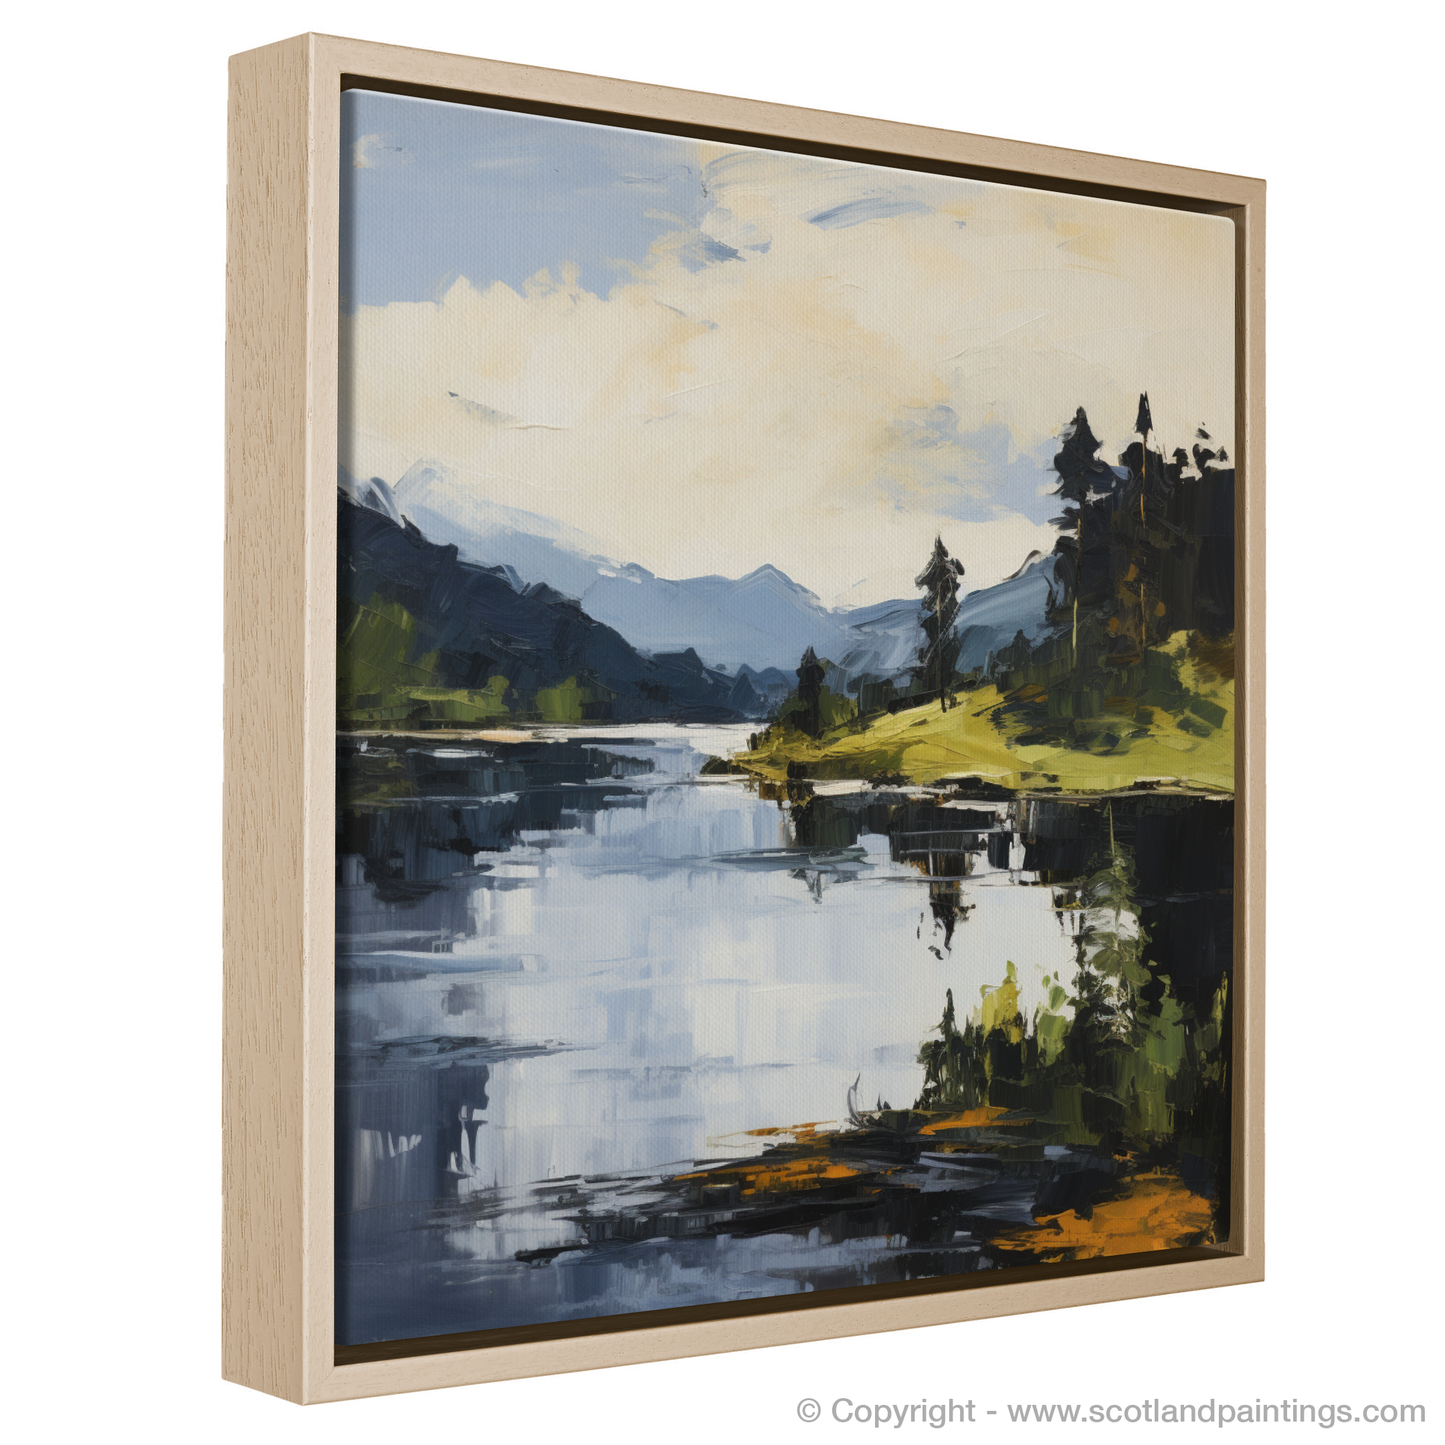 Painting and Art Print of Loch Ard, Stirling in summer entitled "Summer's Embrace at Loch Ard Stirling".